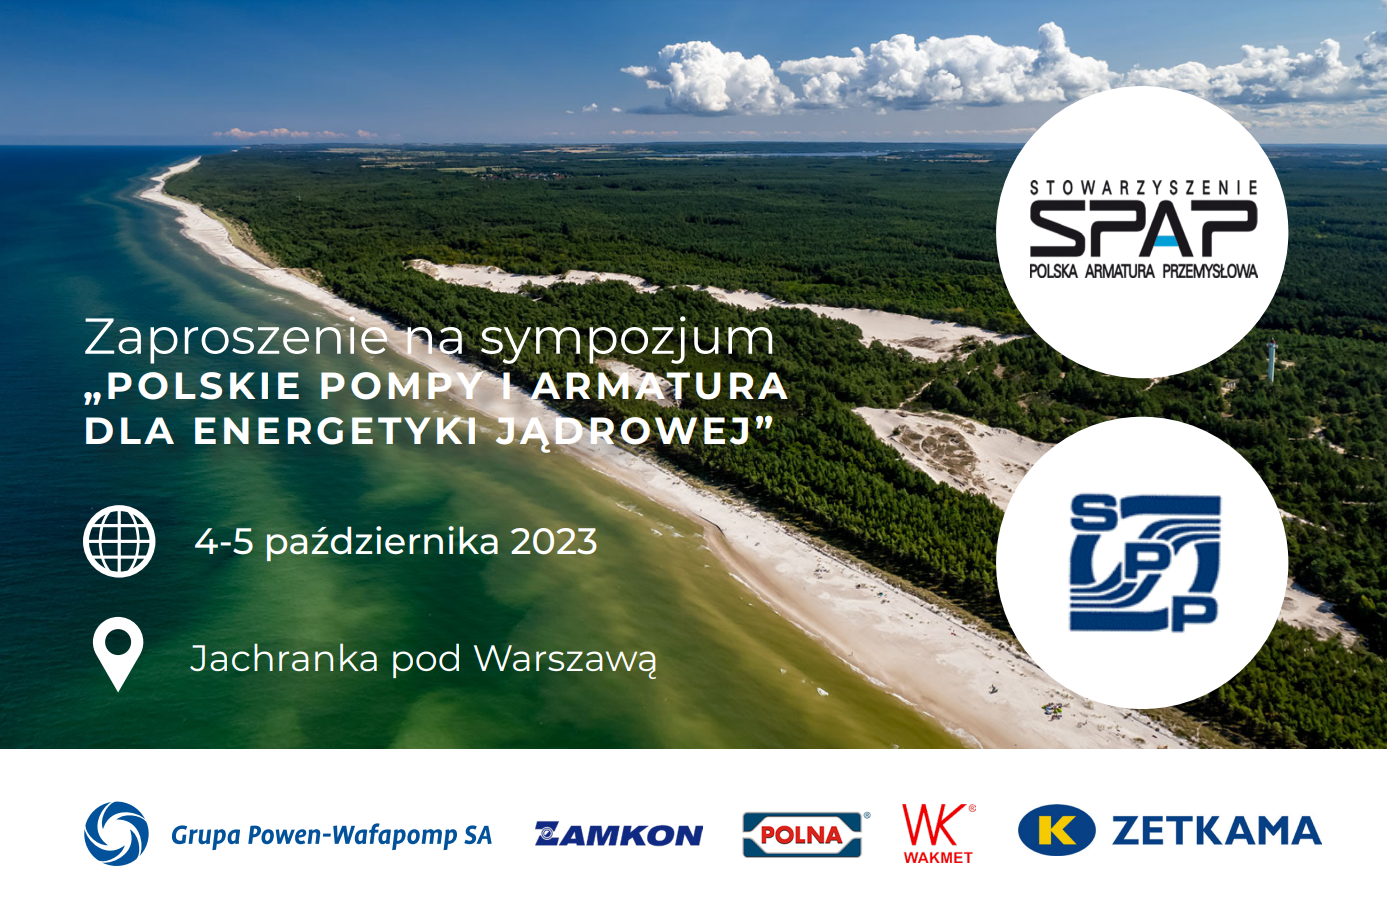 Nuclear Energy: Poland Pumps and Fittings – Symposium